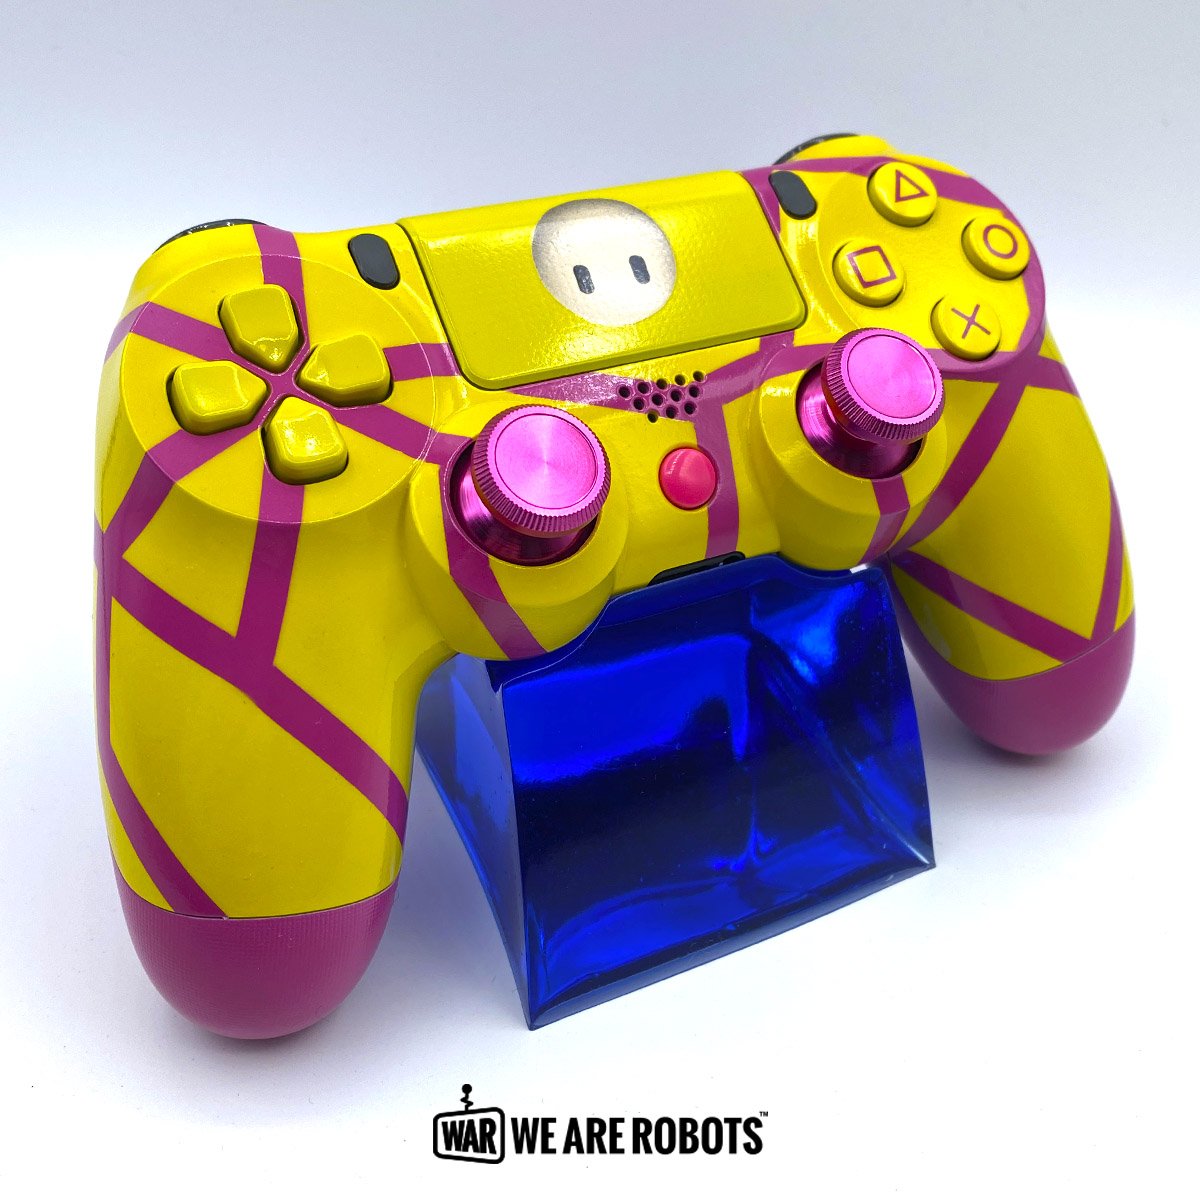 We Are Robots - Fall Guys - PS4 Controller